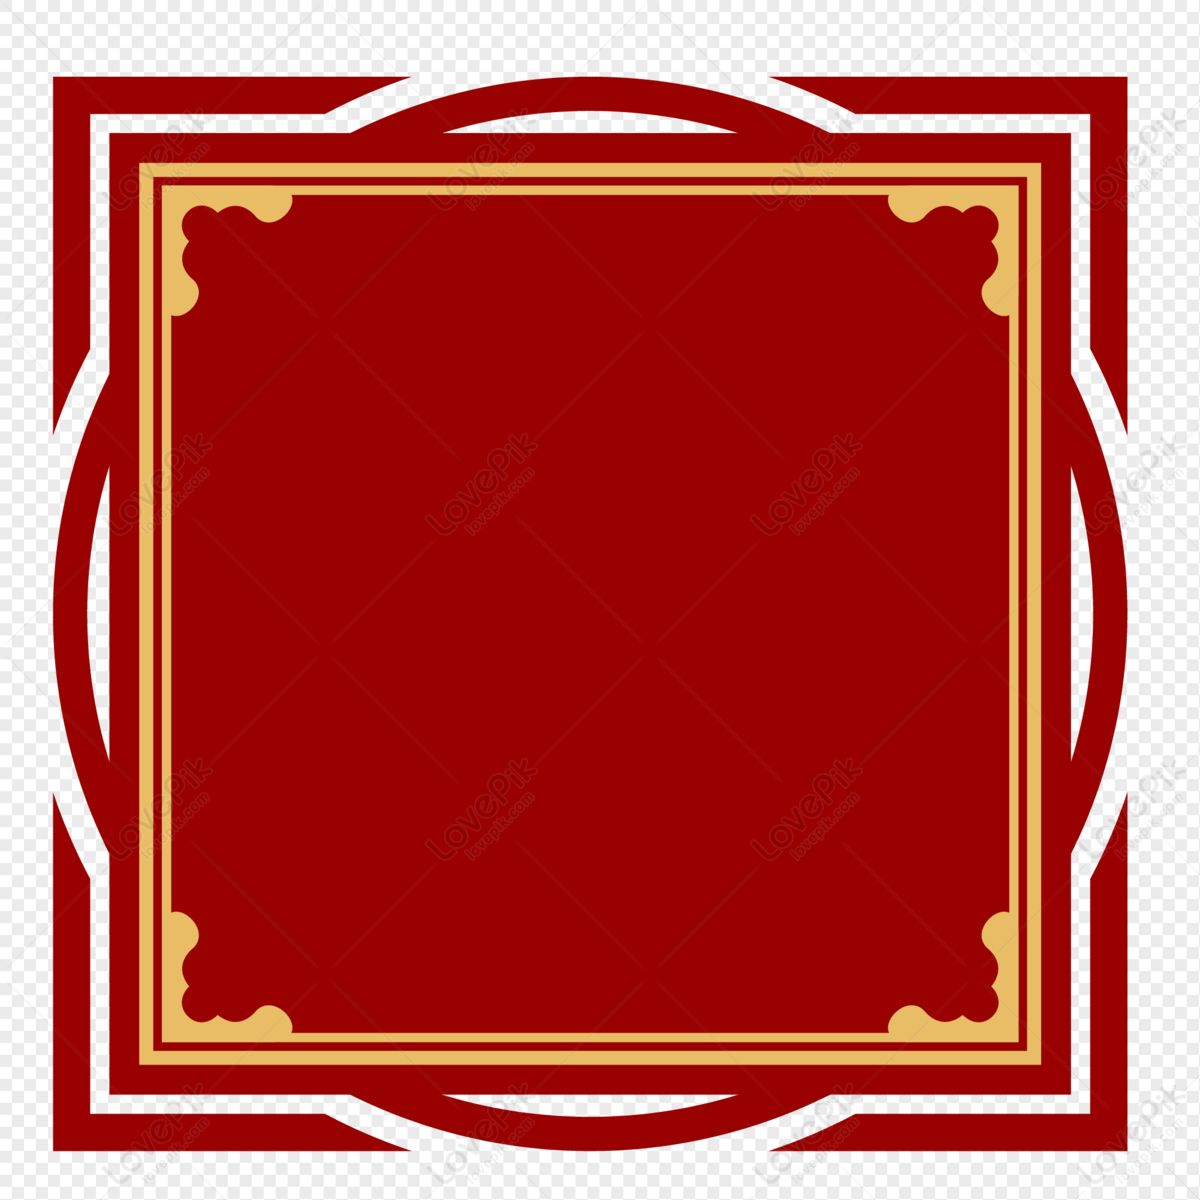 Red Border Shading PNG Transparent Image And Clipart Image For Free ...